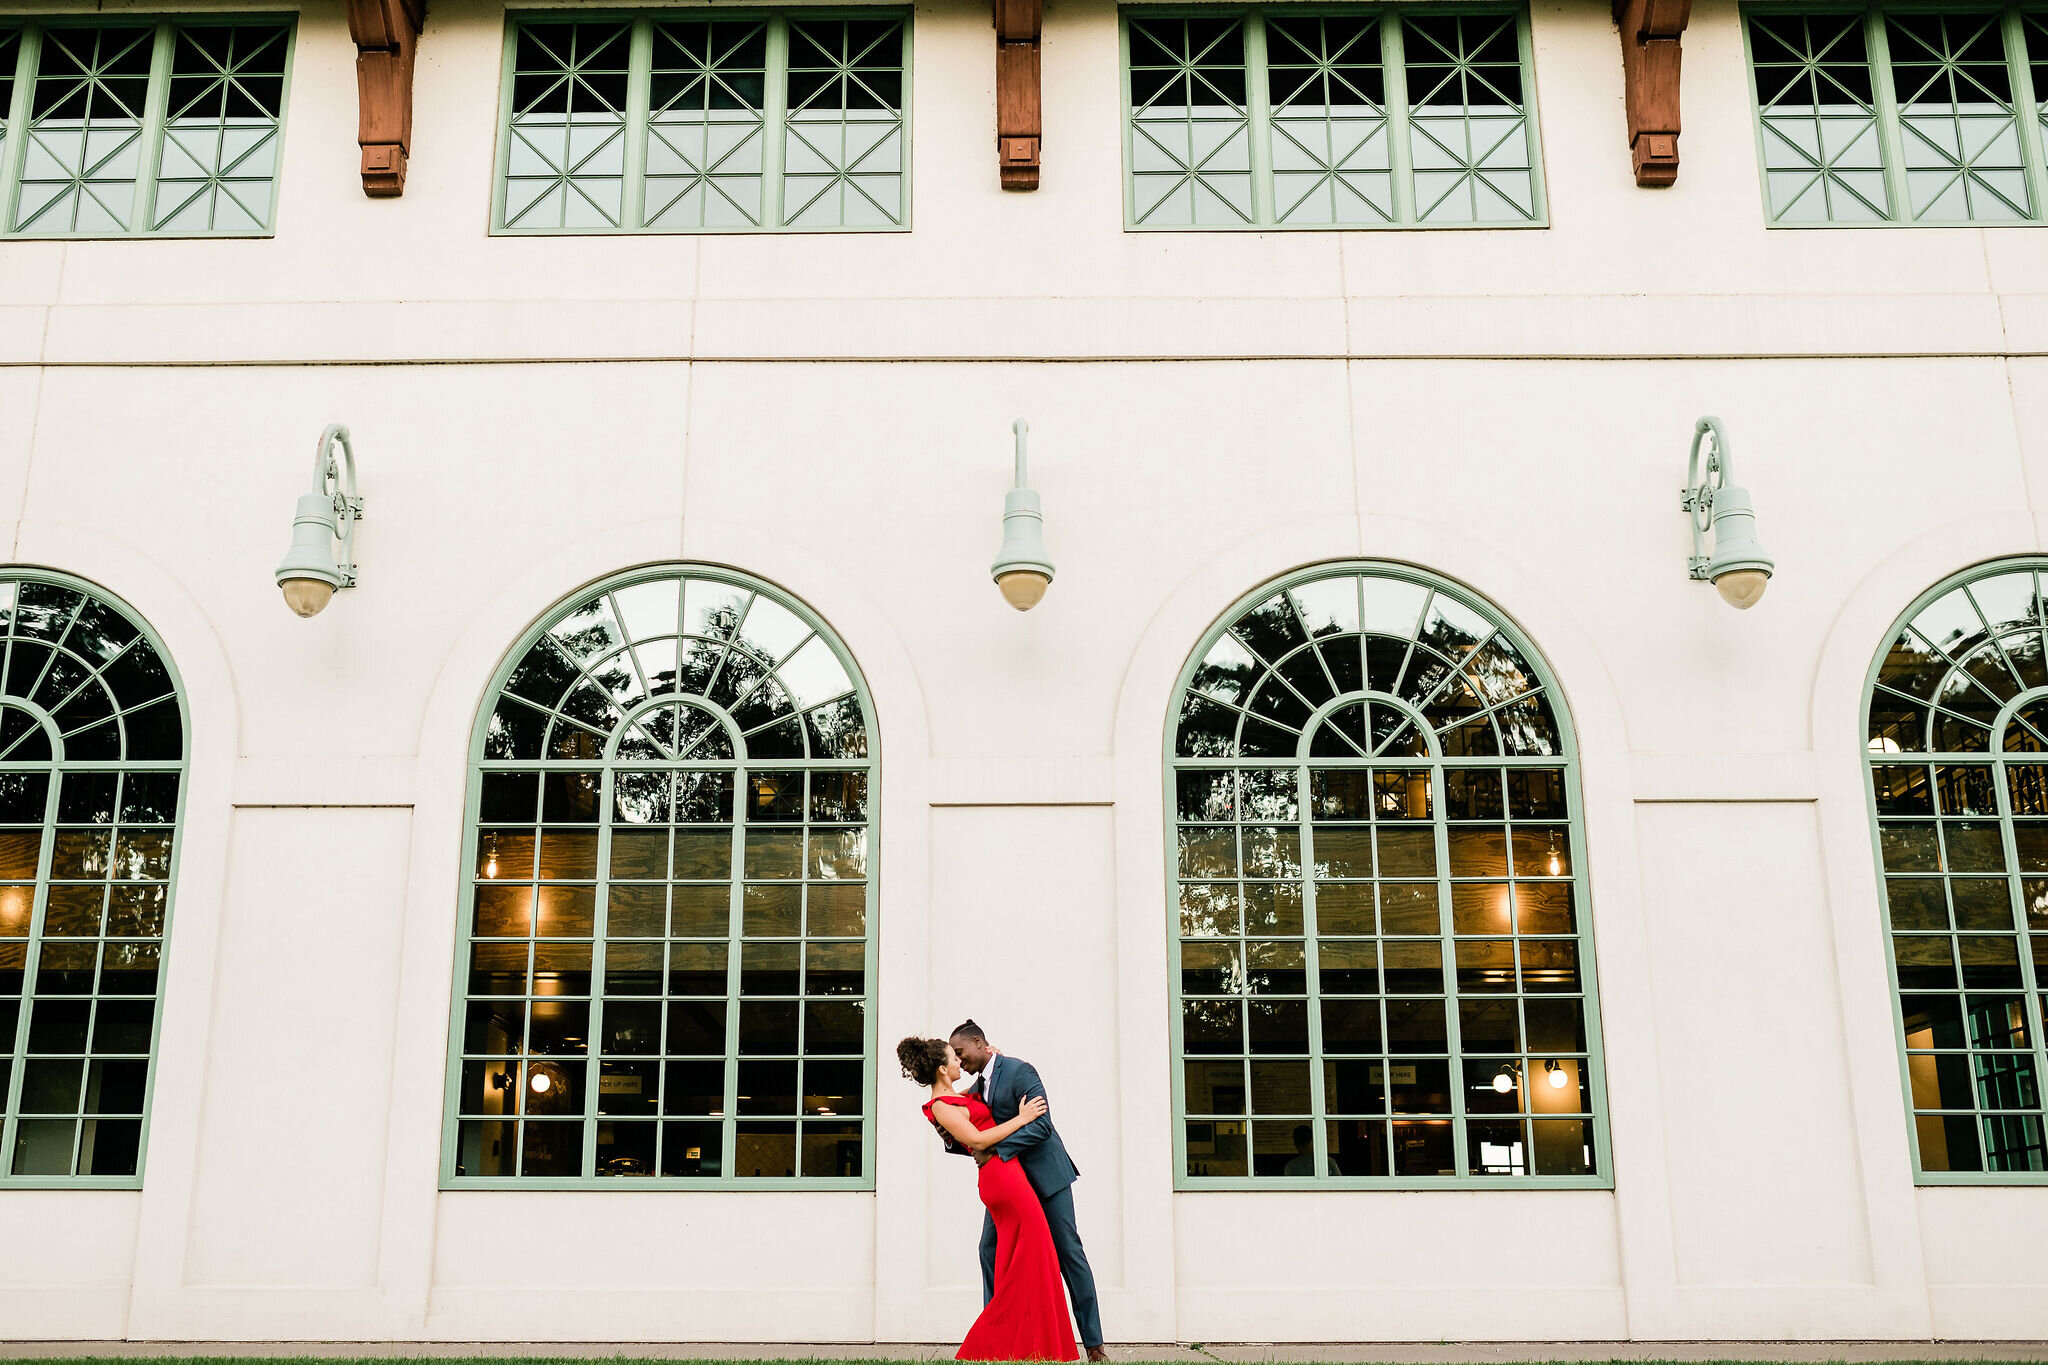 Engaged couple in front of a building with a lot of windows